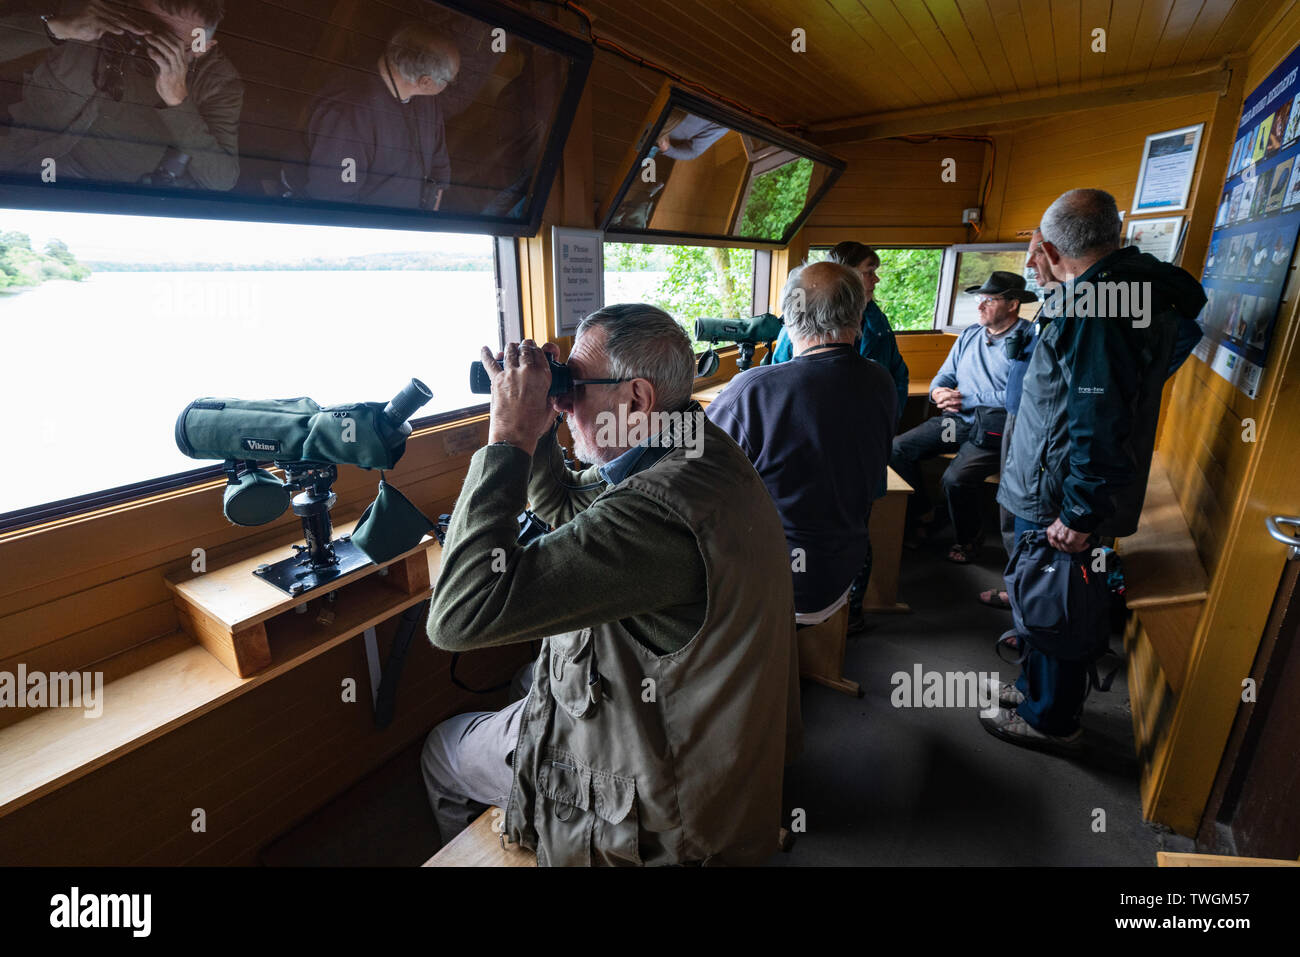 Birdwatchers inside Osprey birdwatching hide at Scottish Wildlife Trust visitor centre at Loch of the Lowes, near Dunkeld in Perthshire, Scotland, UK Stock Photo